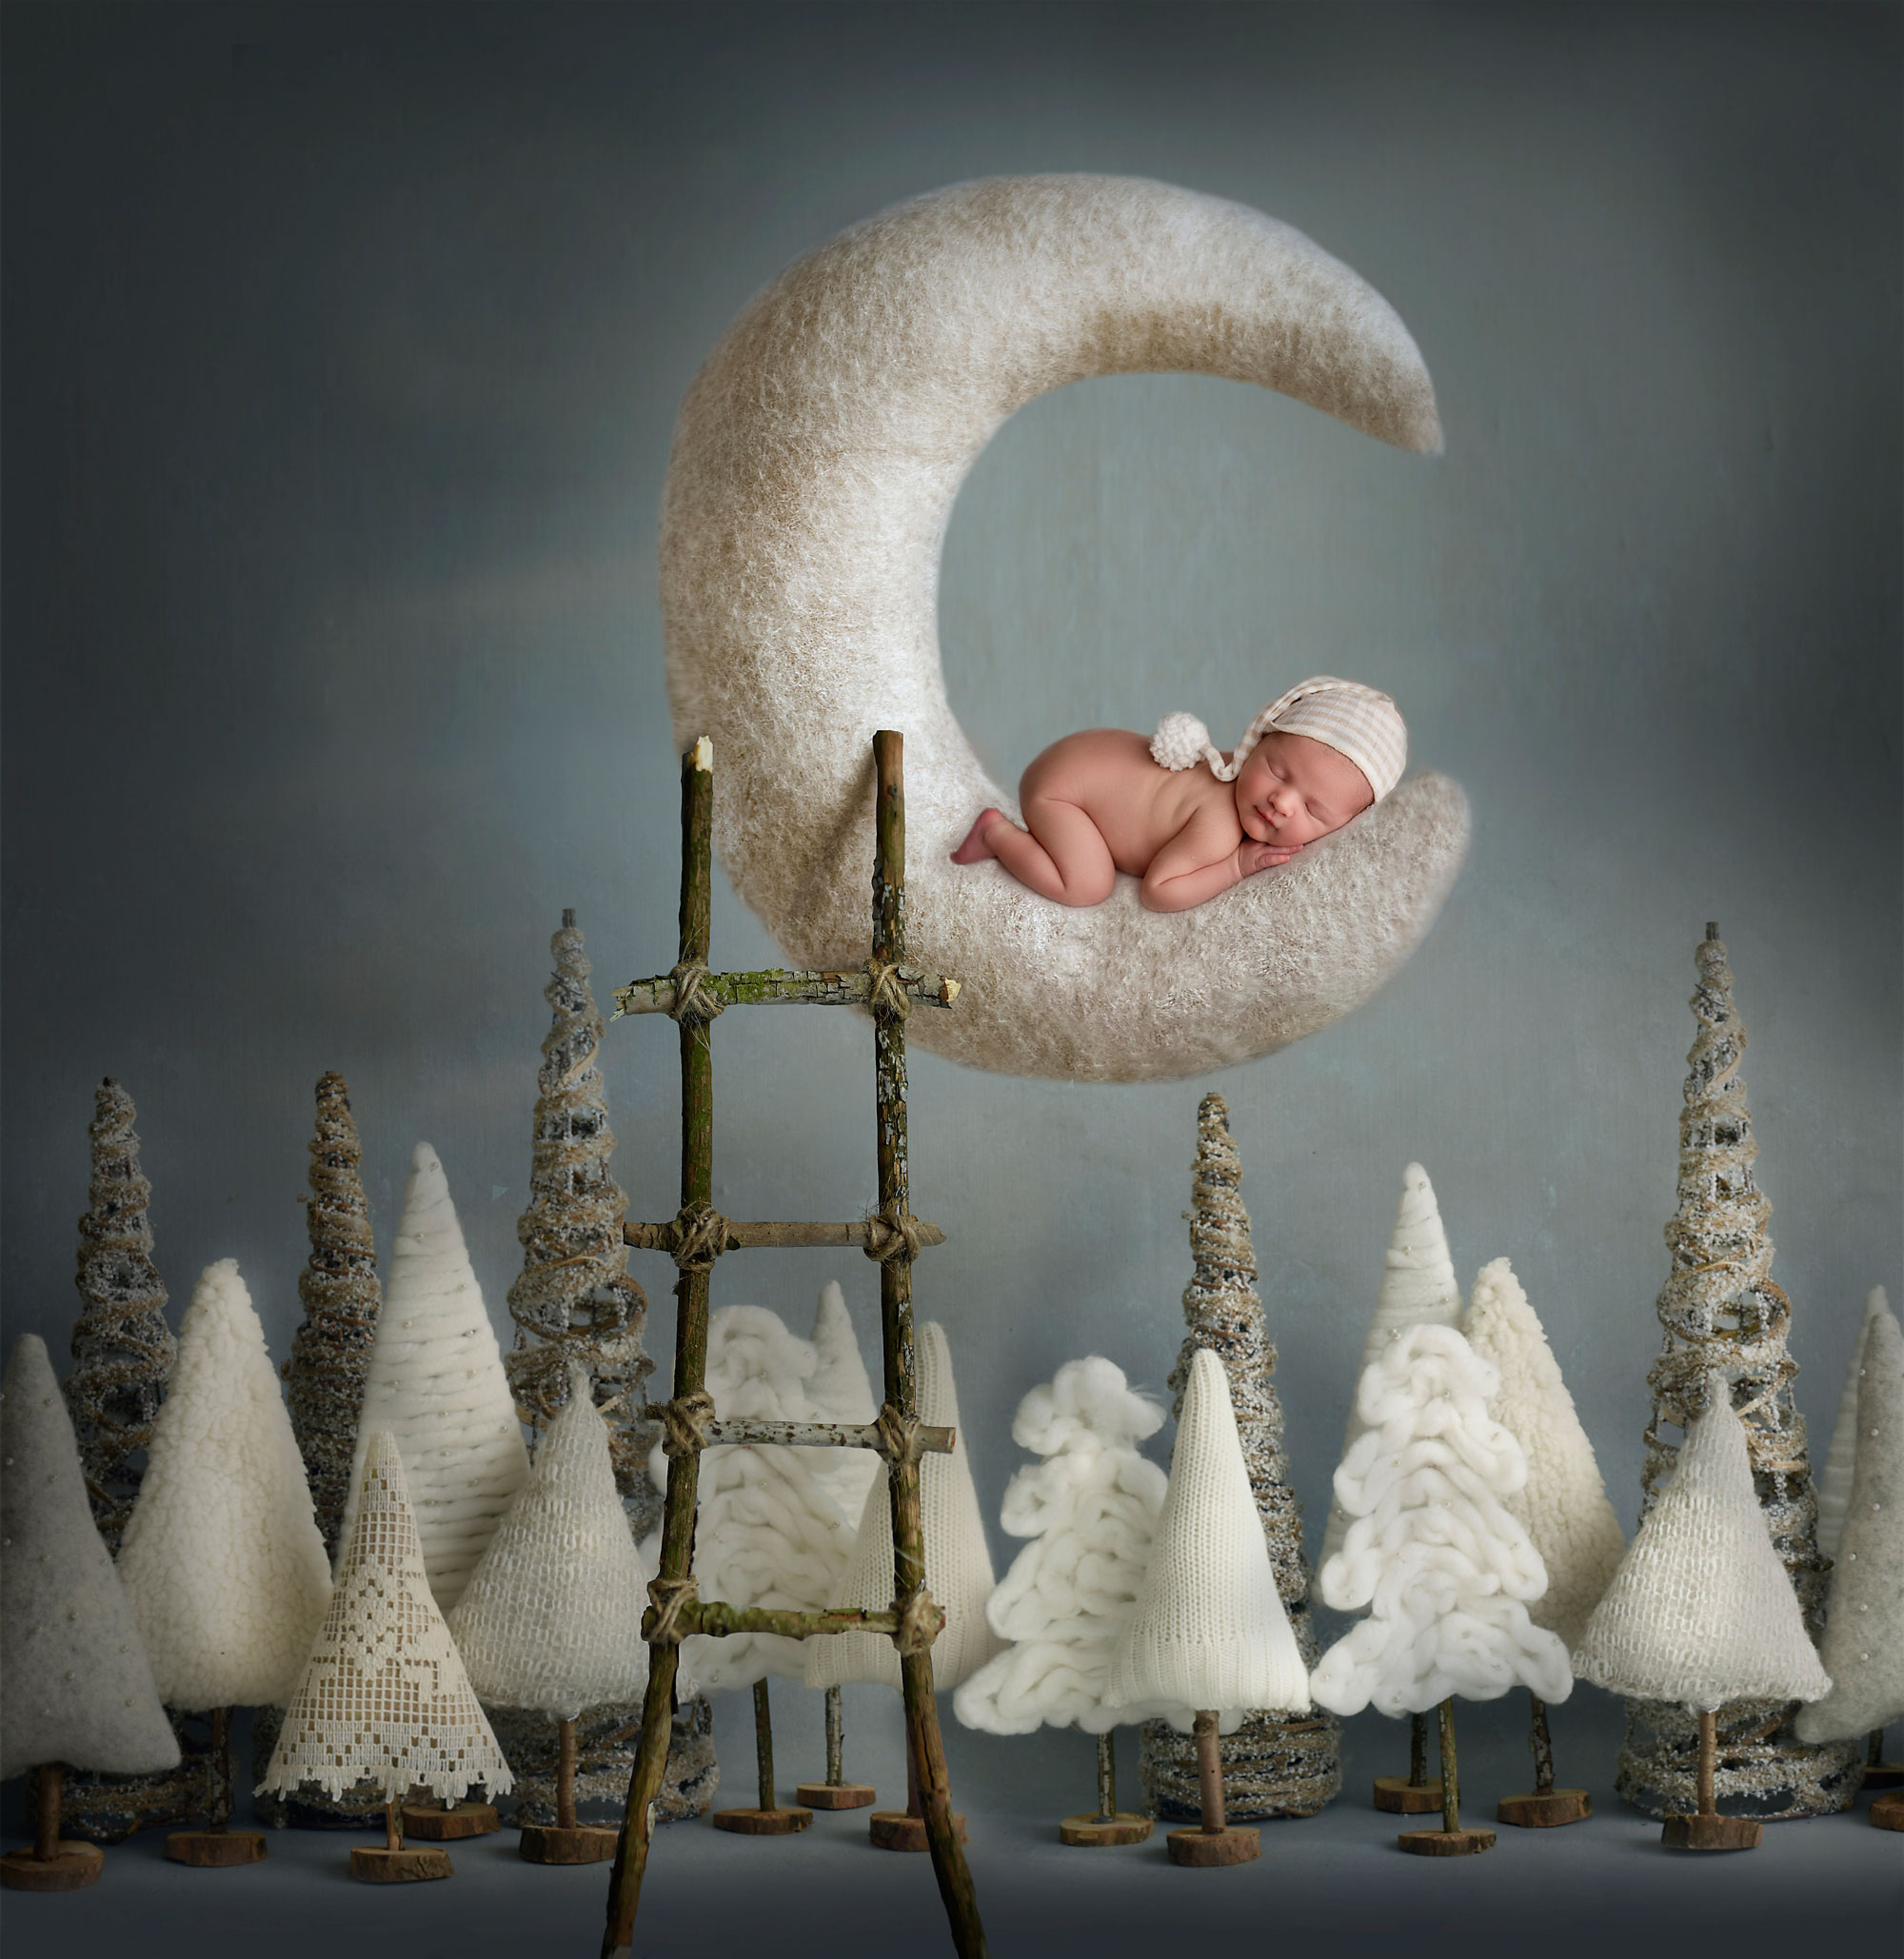 newborn photo ideas for photography session baby on the moon